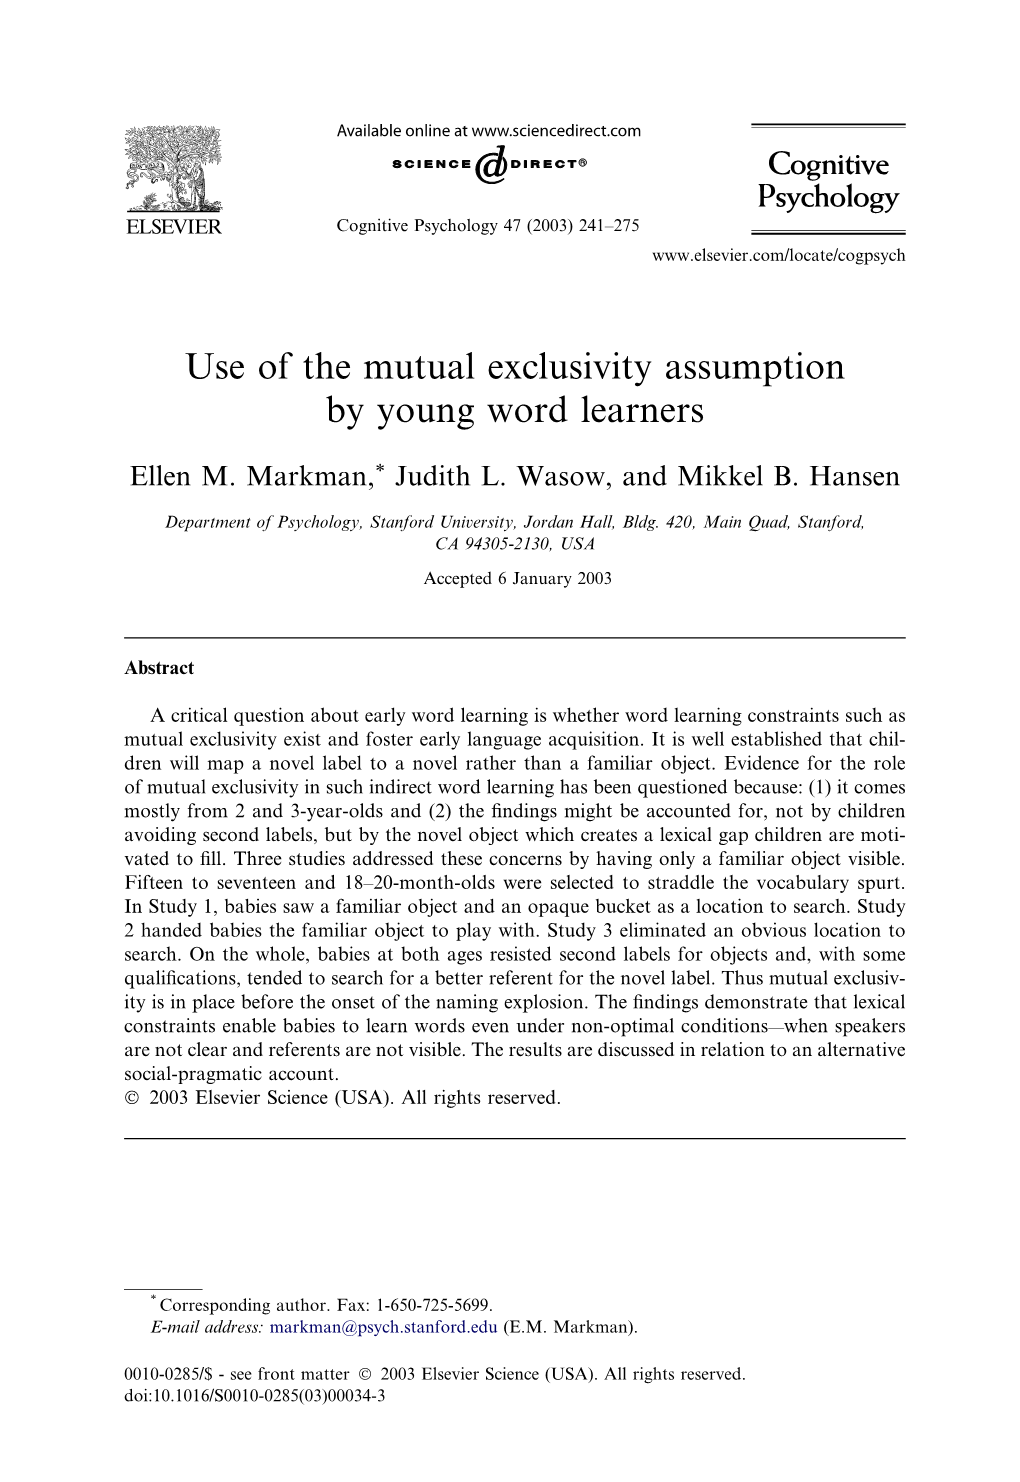 Use of the Mutual Exclusivity Assumption by Young Word Learners